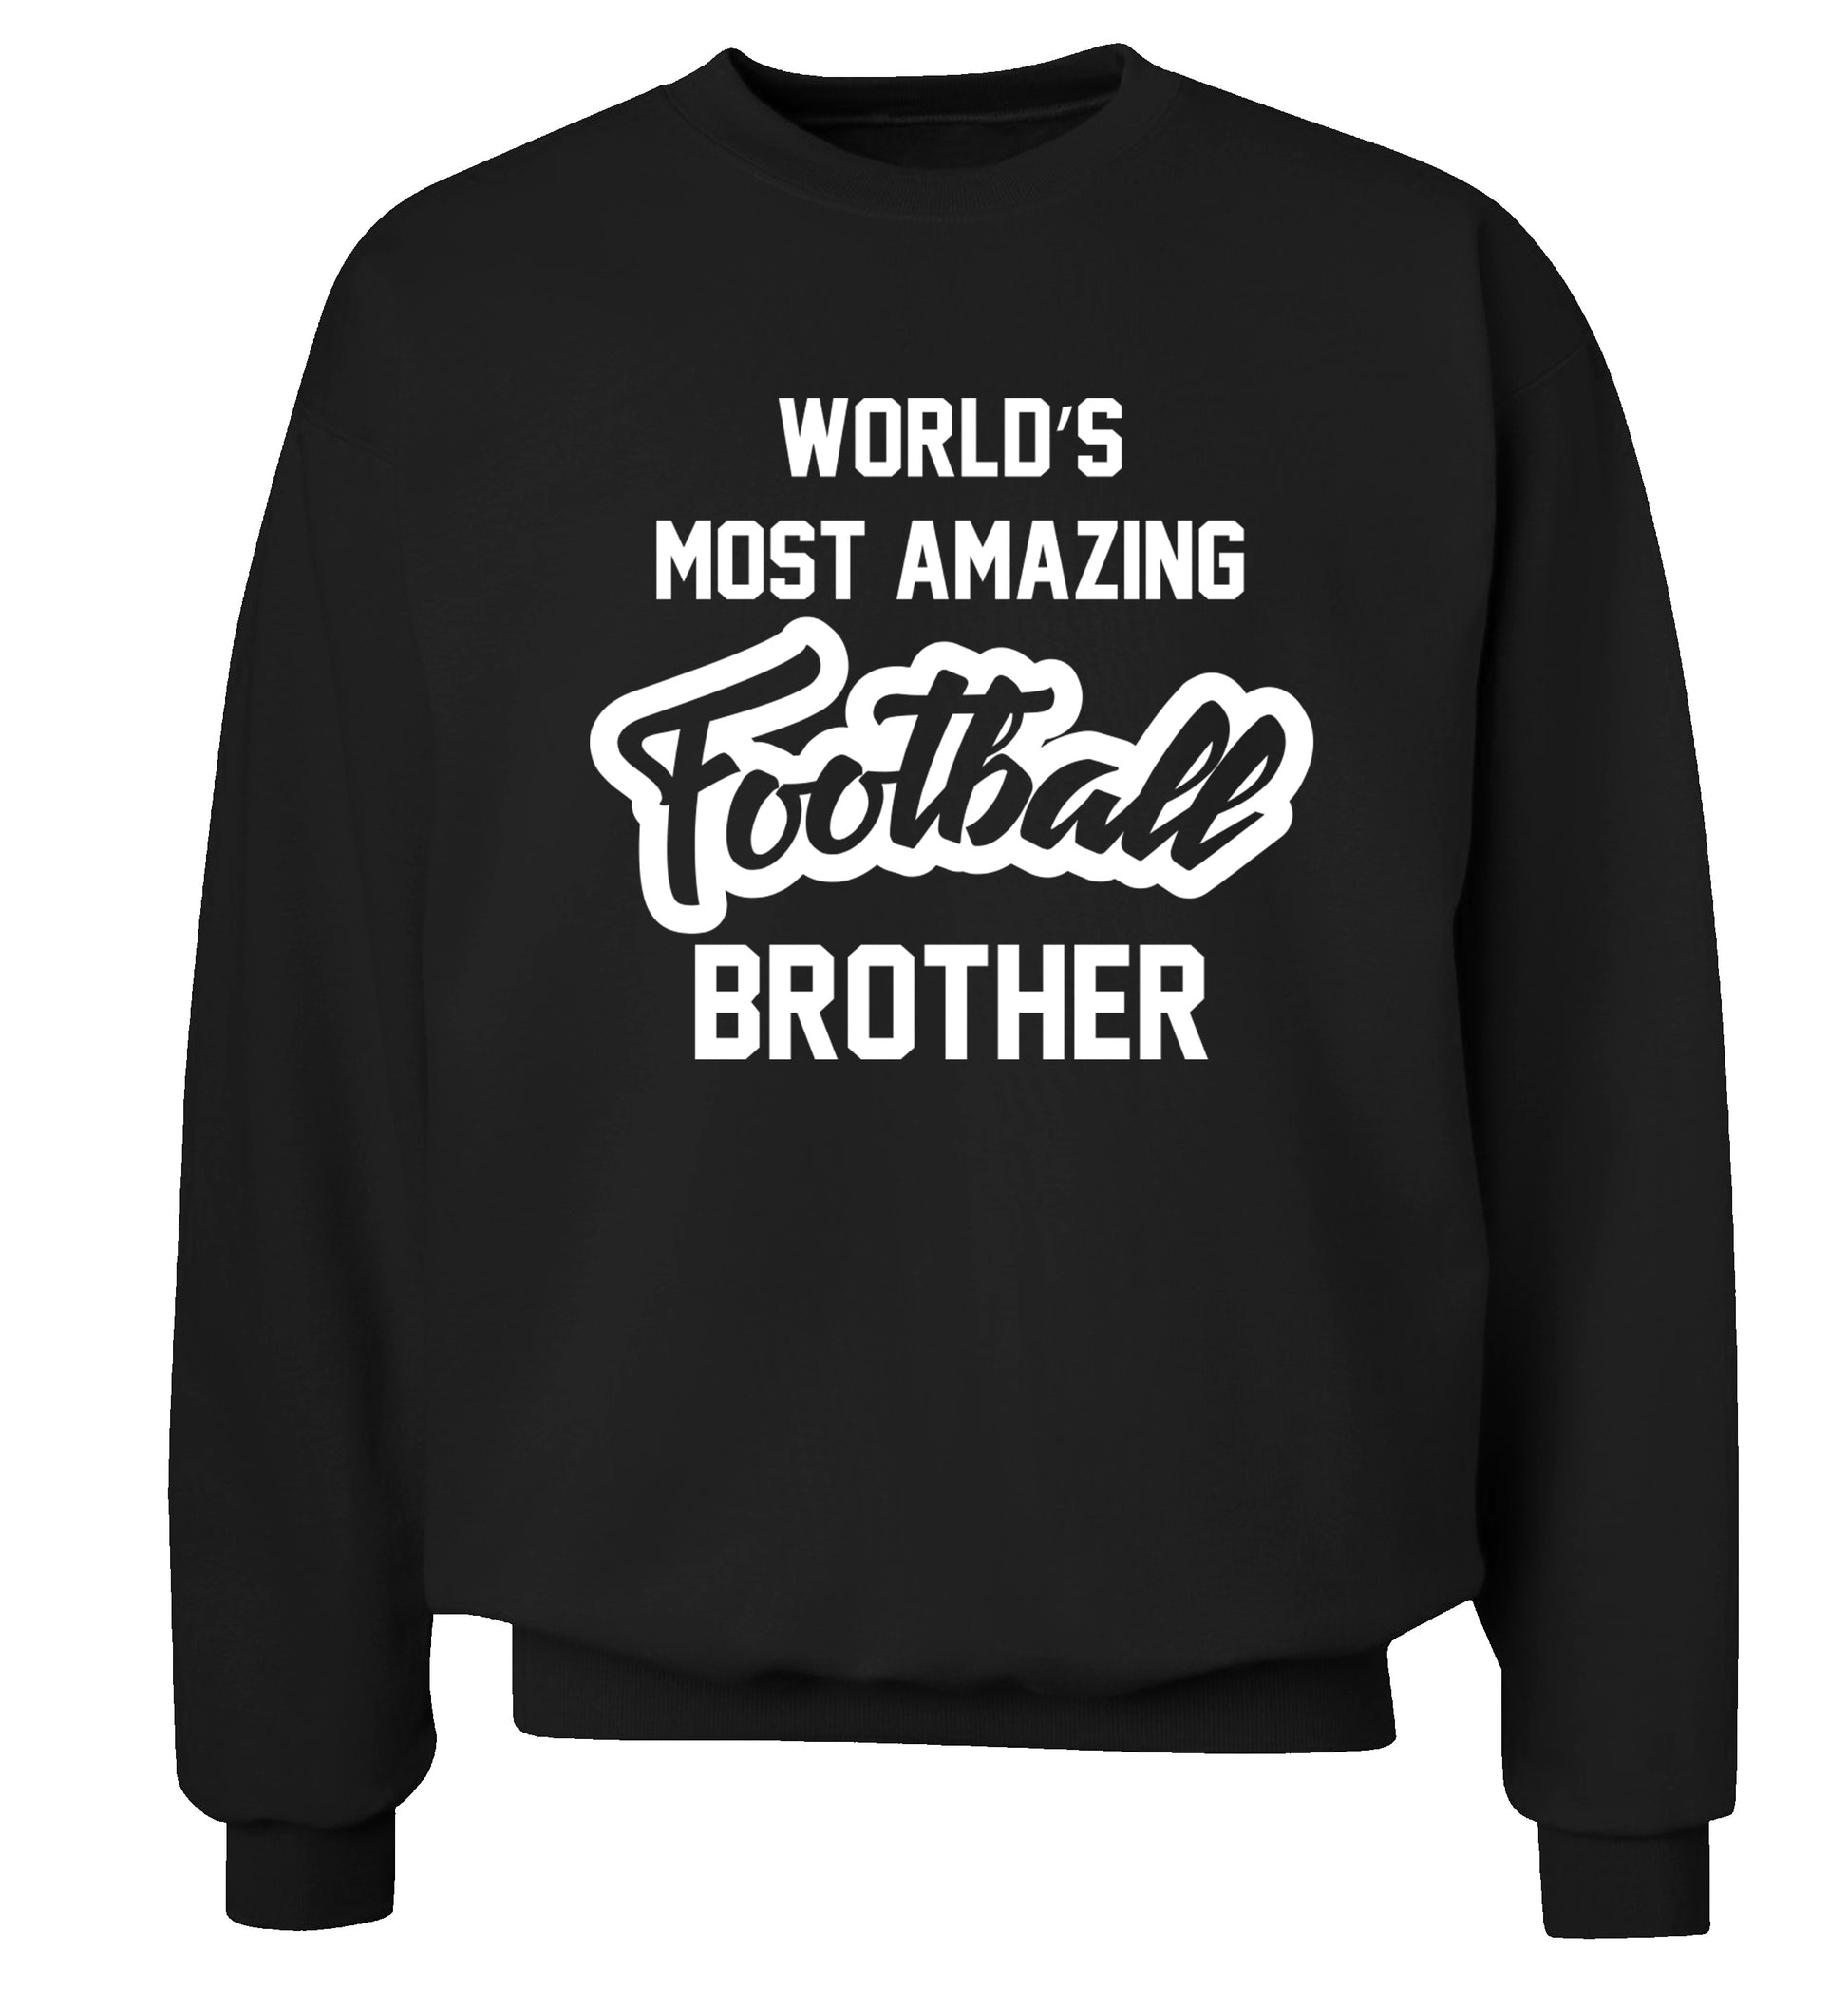 Worlds most amazing football brother Adult's unisexblack Sweater 2XL